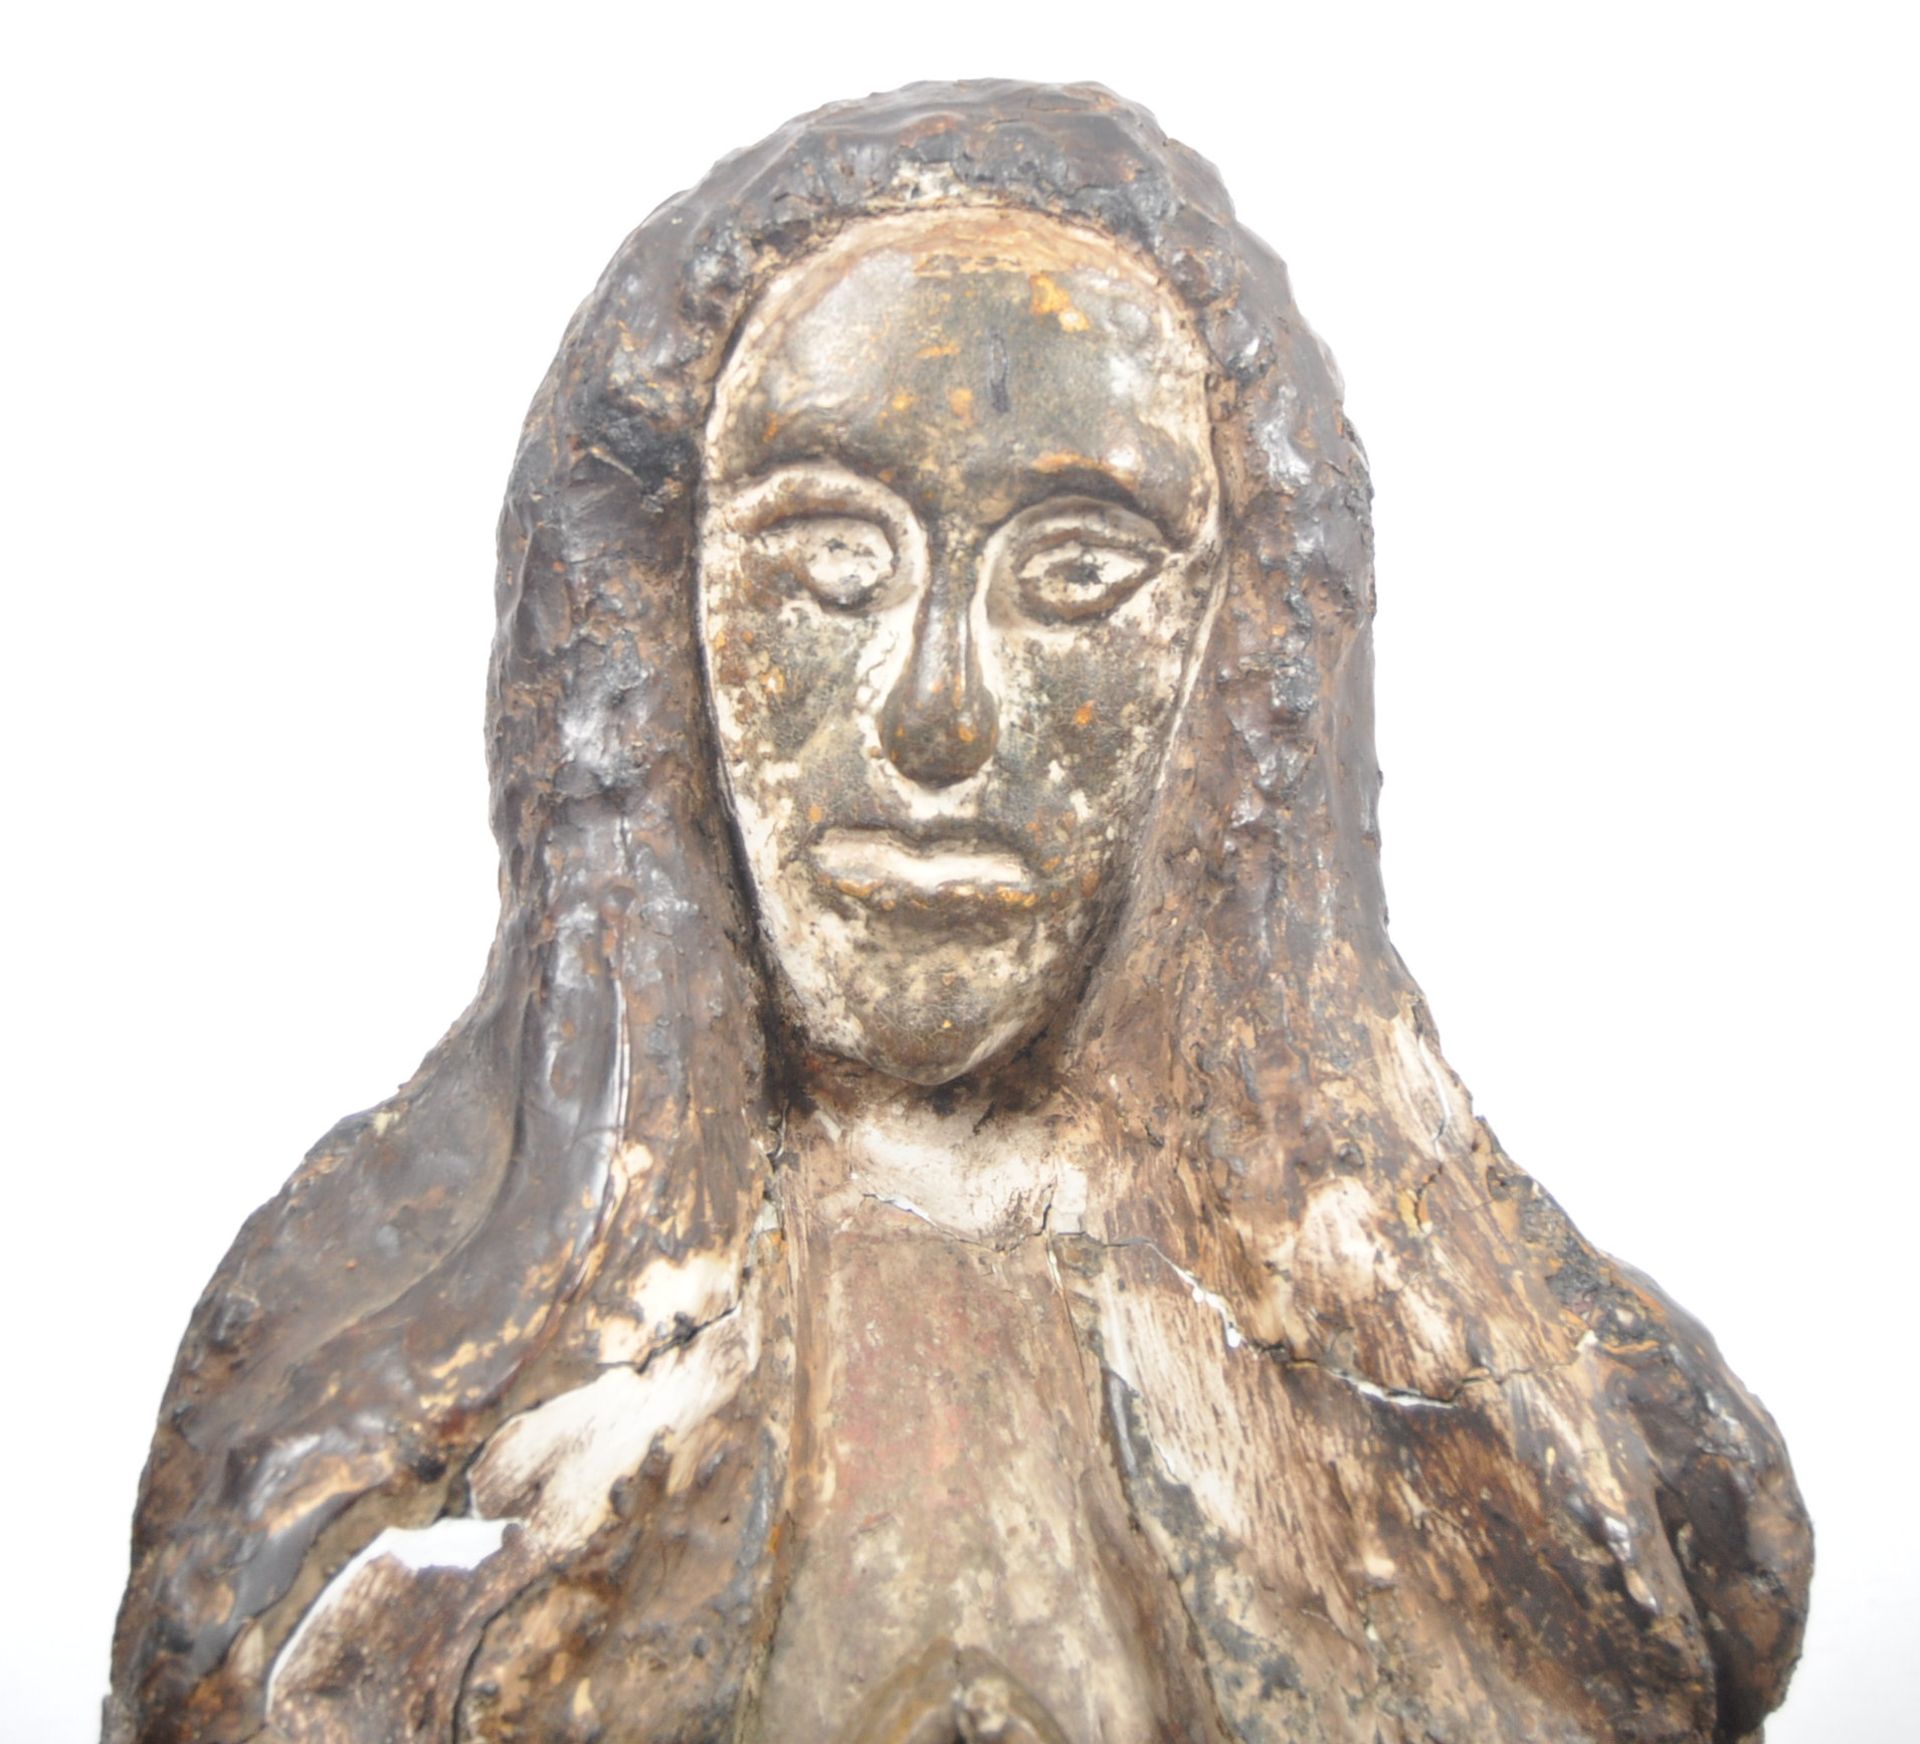 17TH CENTURY CARVED OAK FIGURE OF A RELGIOUS FIGURE - Image 2 of 5